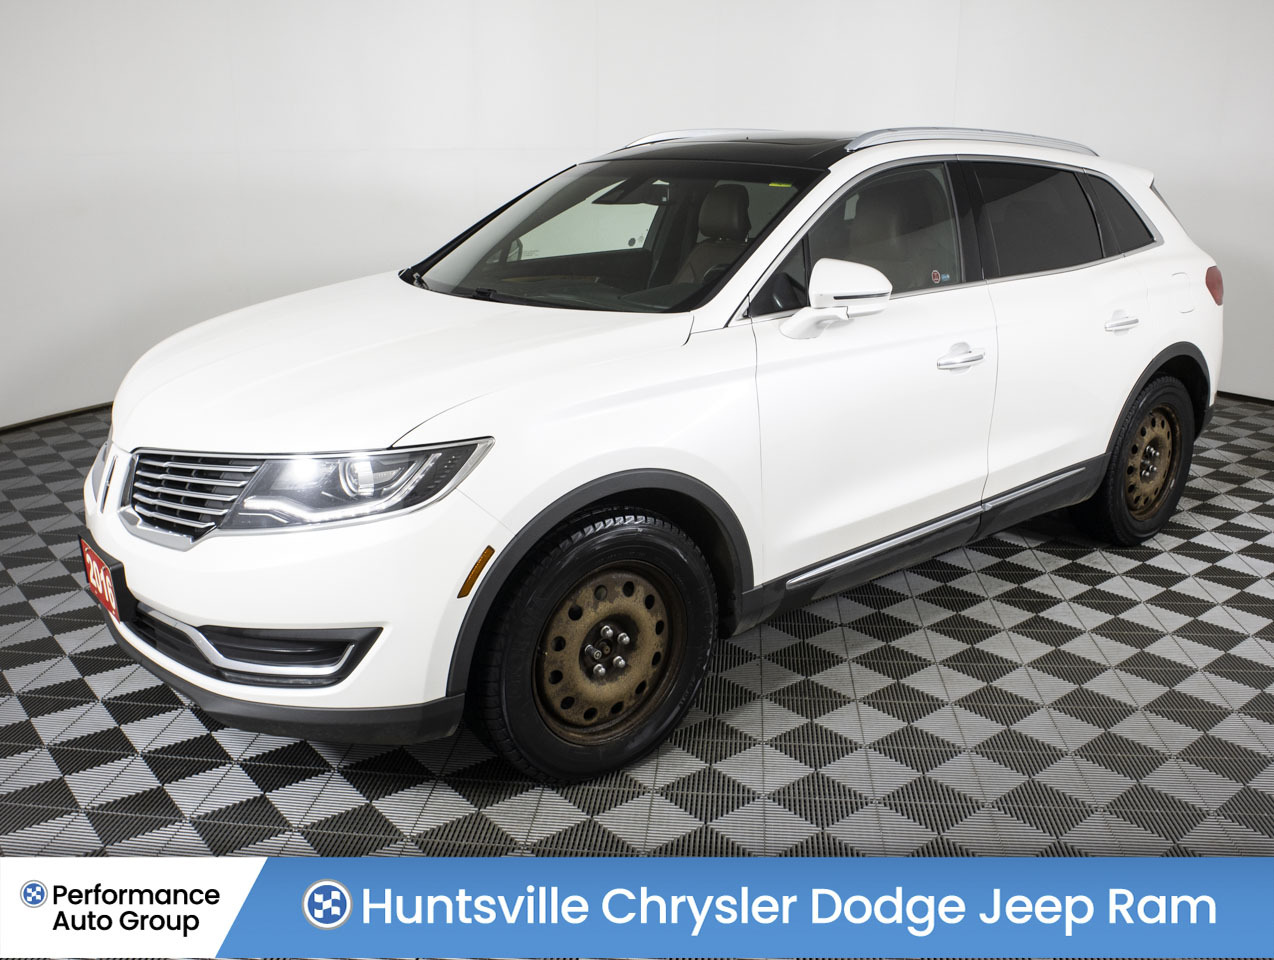 2016 Lincoln MKX MKX AWD - 2 Sets of Wheels - Moonroof